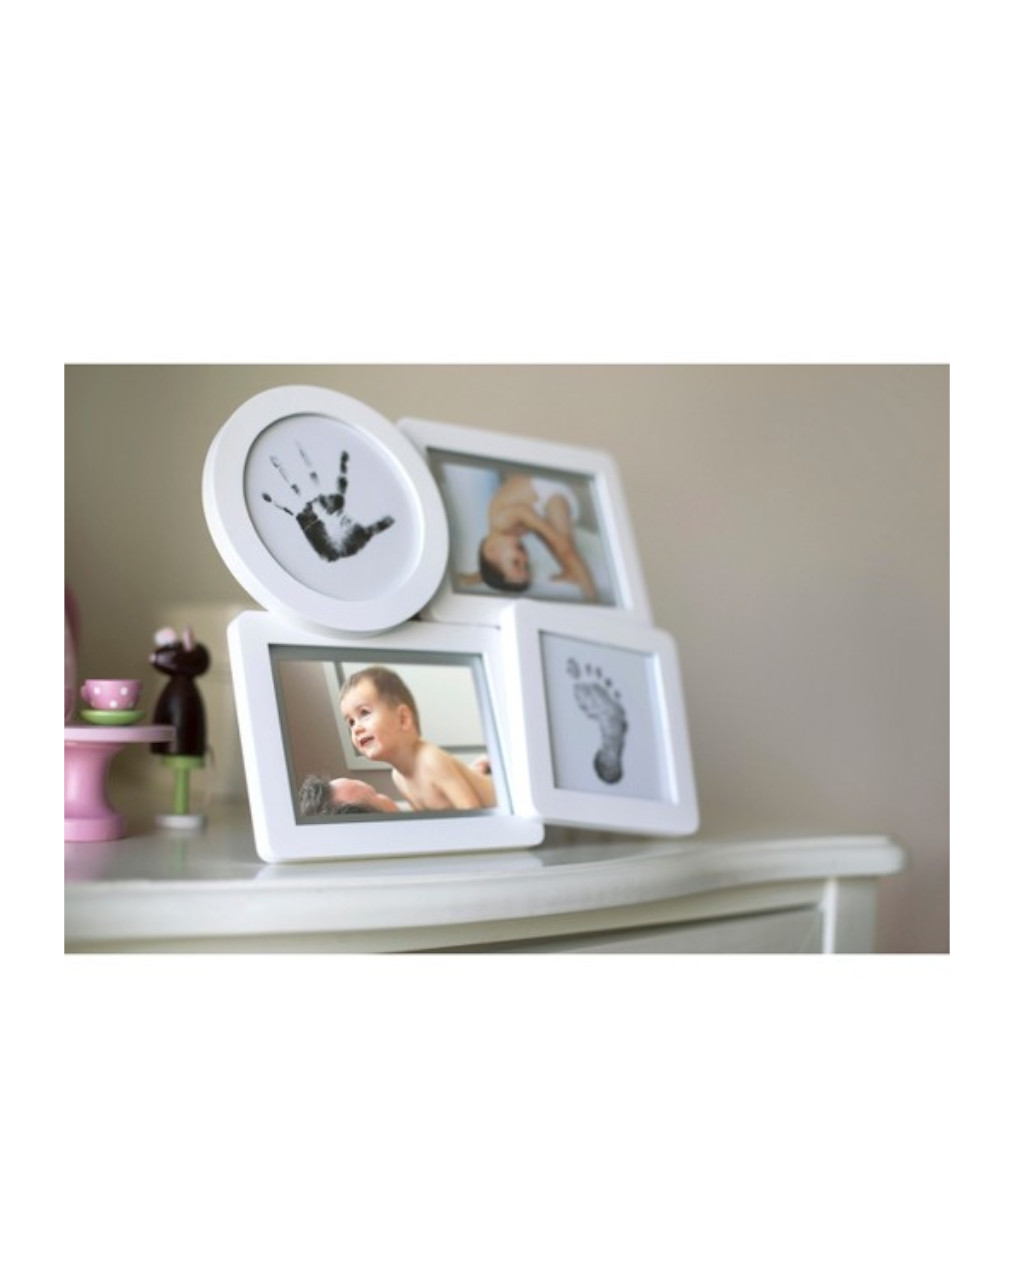 Babyprints collage frame - Pearhead